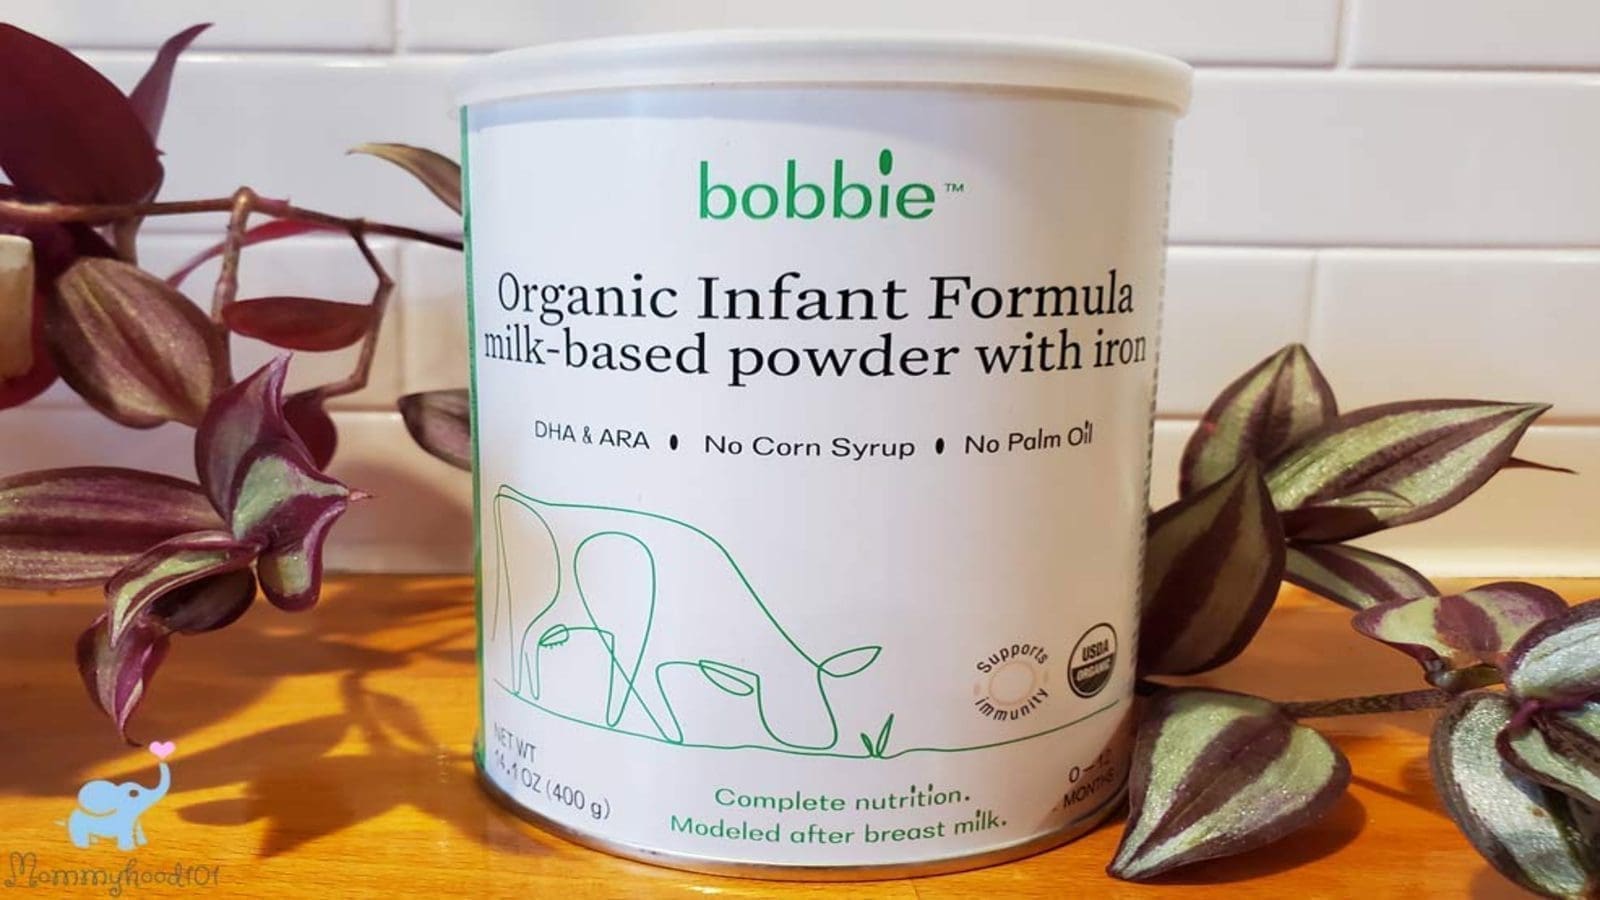 Bobbie inaugurates new research and development hub dedicated to enhancing infant nutrition